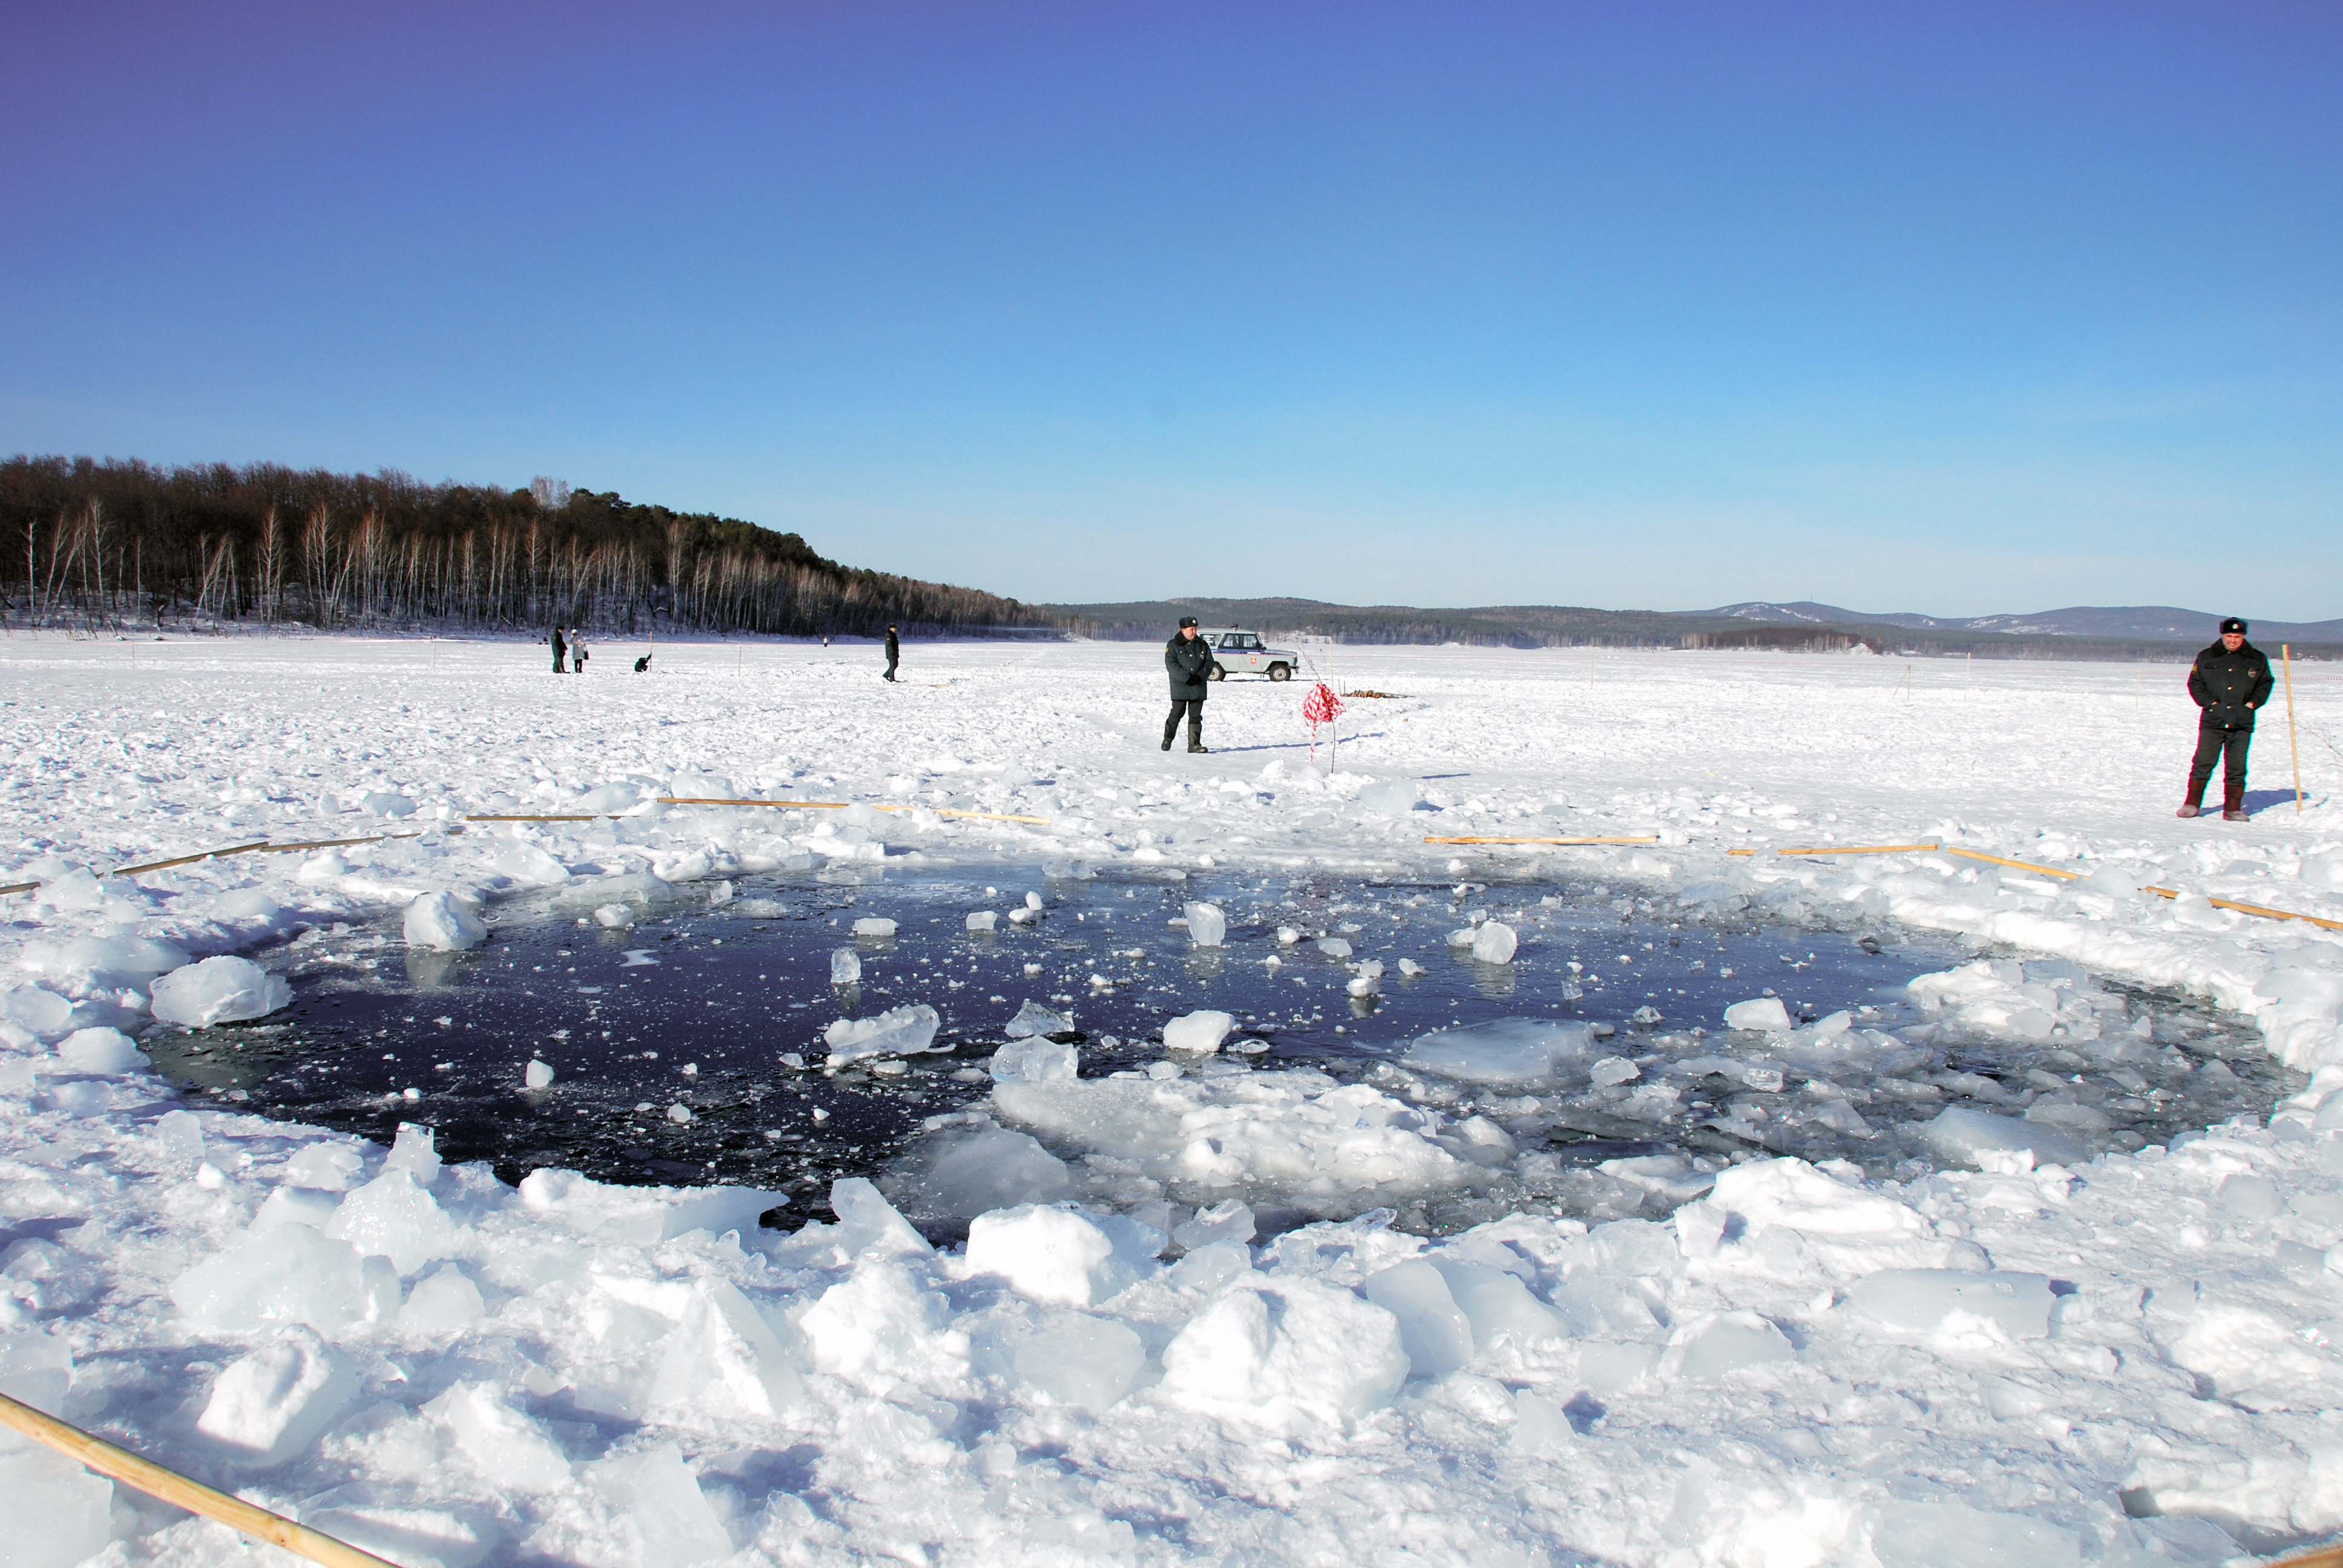 Bullseye: A hole left in a frozen lake in Chelyabinsk, thought to have been punched out by a fragment of the meteor that struck in 2013.